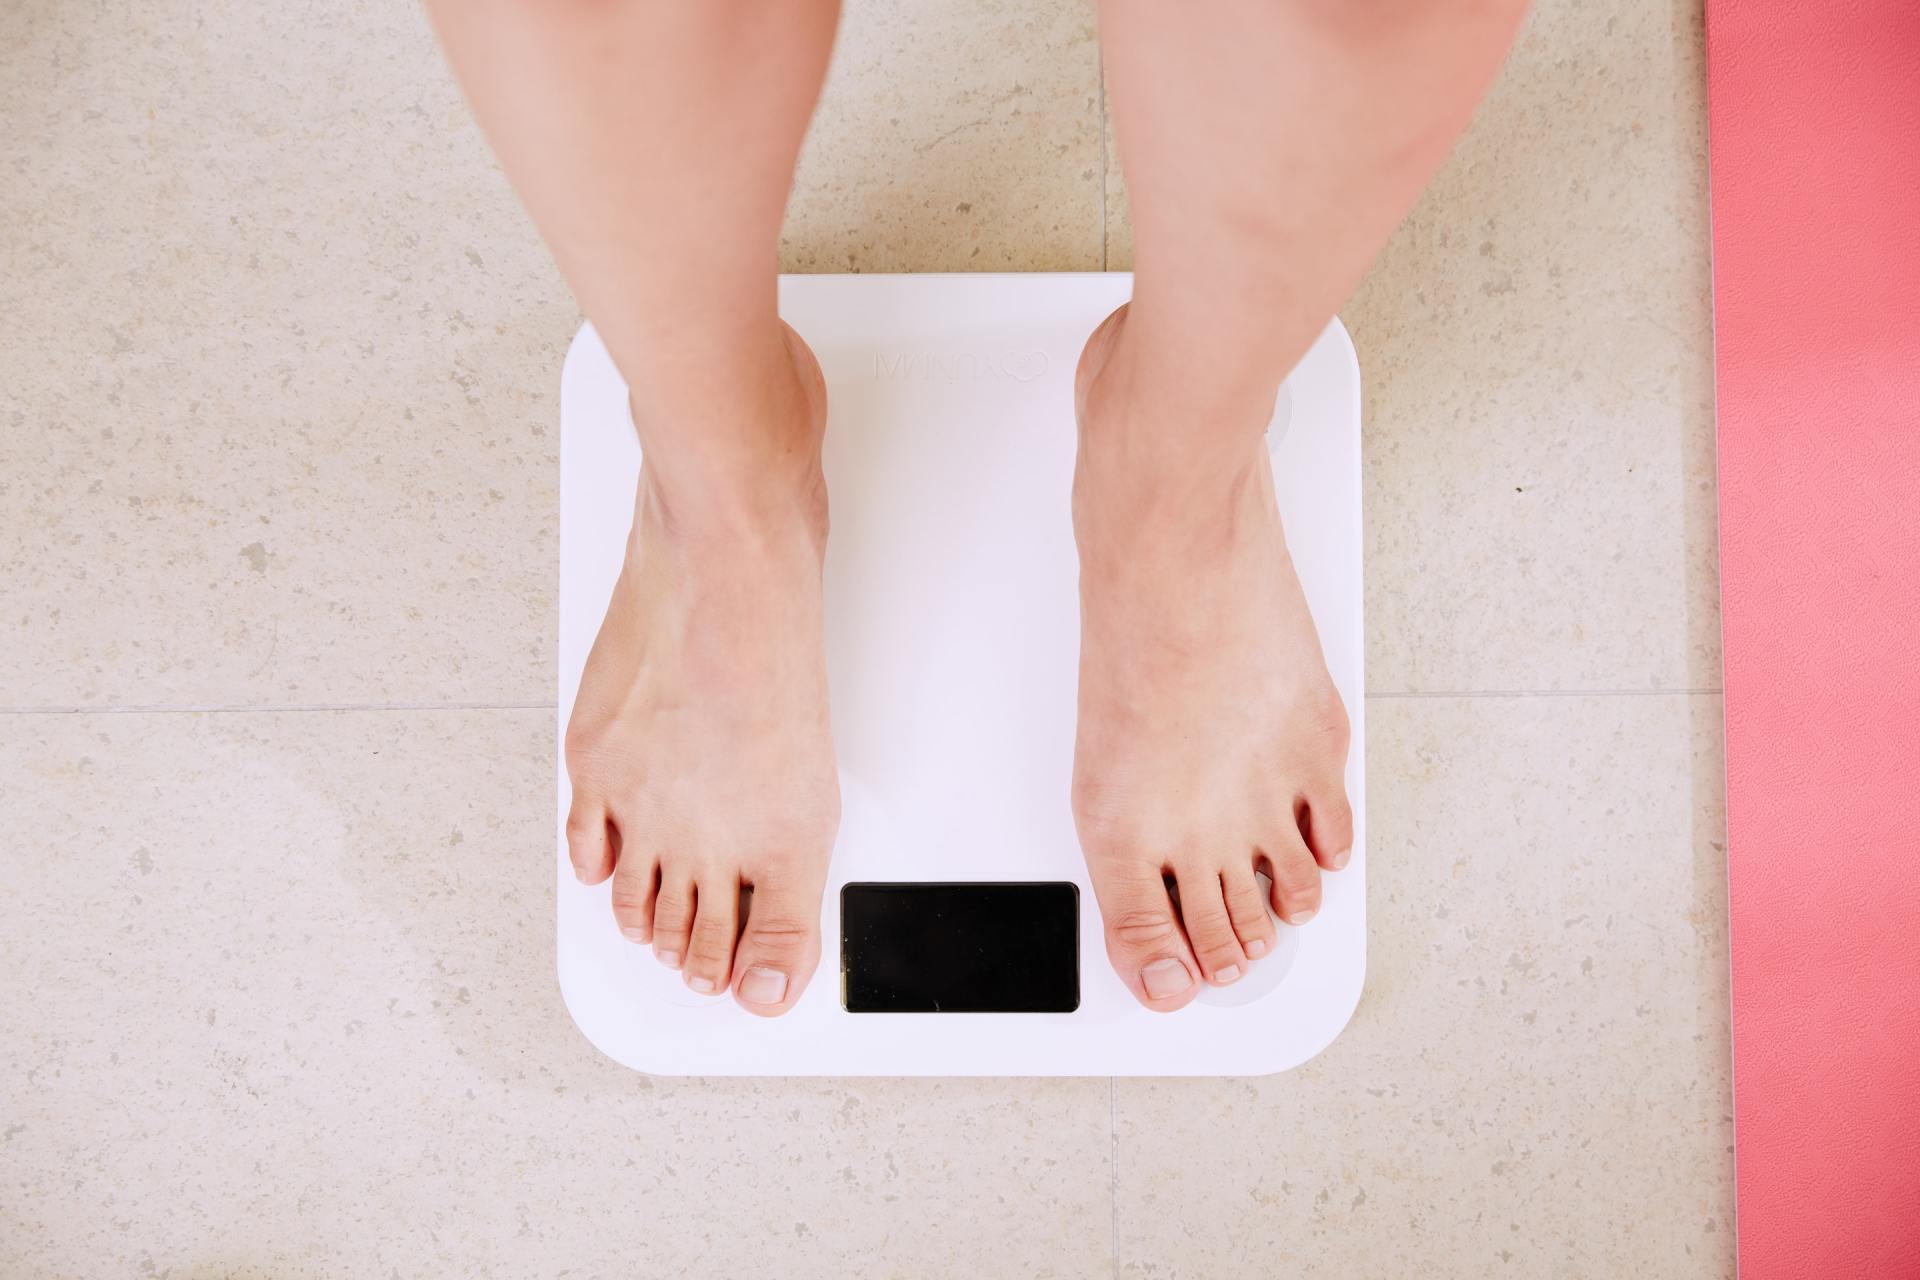 Obesity Treatment at Sugarloaf Urgent Care and Primary Care